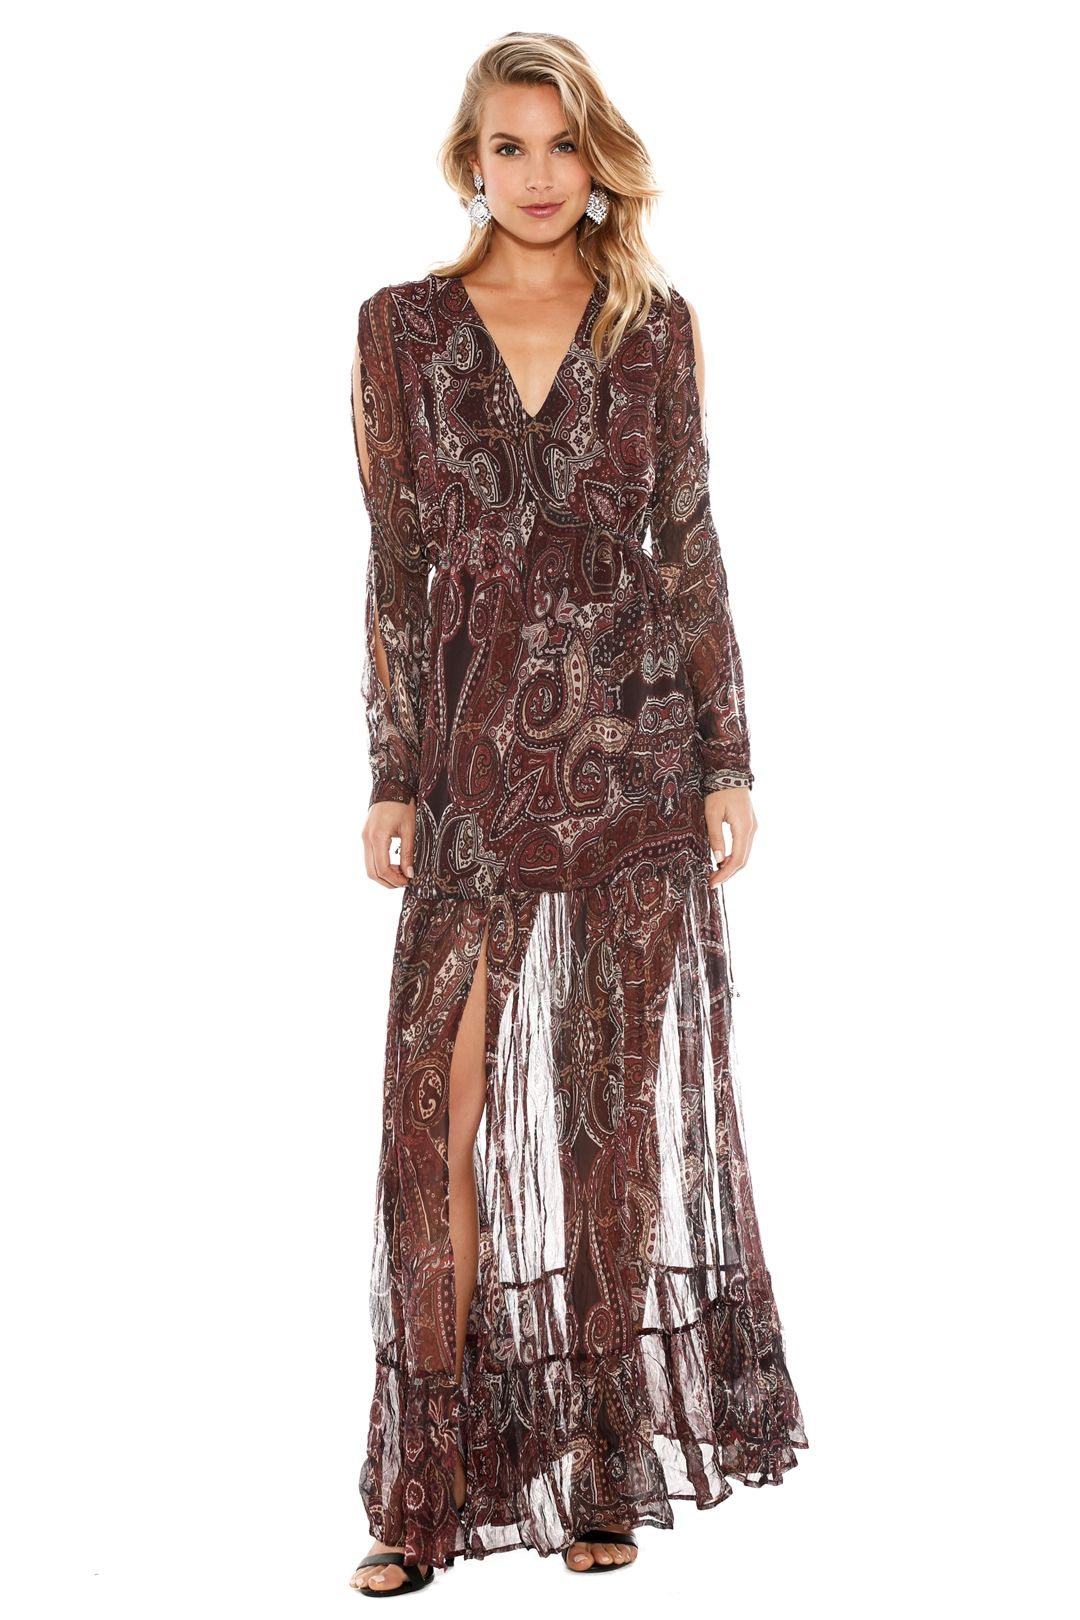 The Jetset Diaries - Labyrinth Paisley Maxi Dress - Burgundy - Front